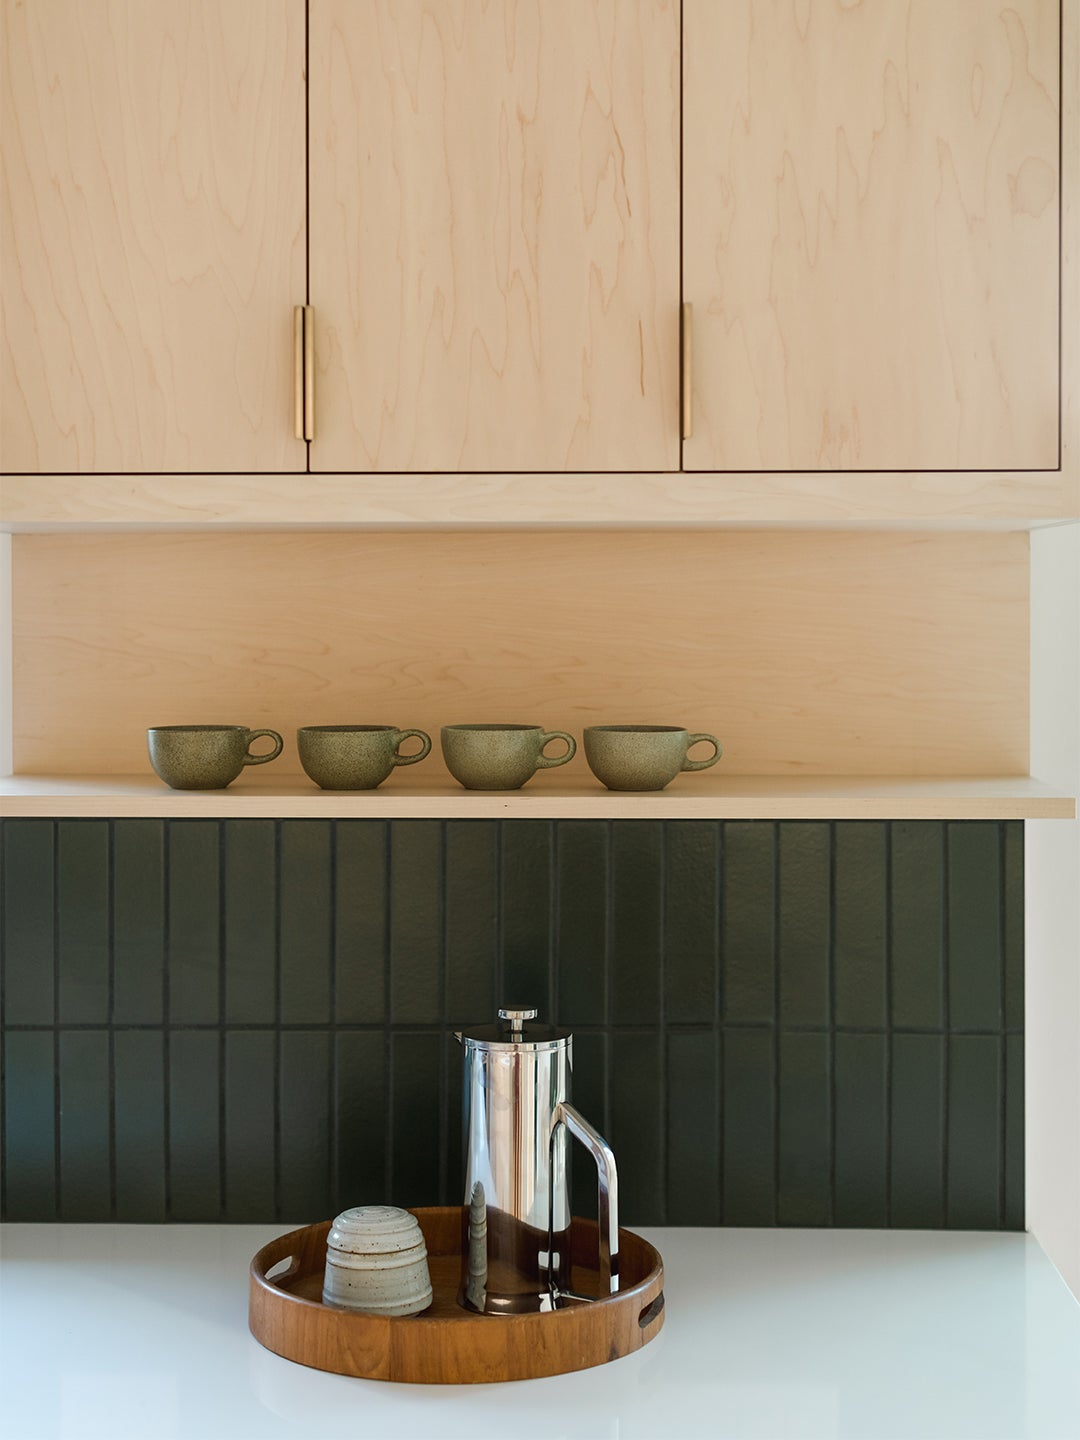 These Designers Came Up with a Clever Upper Kitchen Cabinet Design